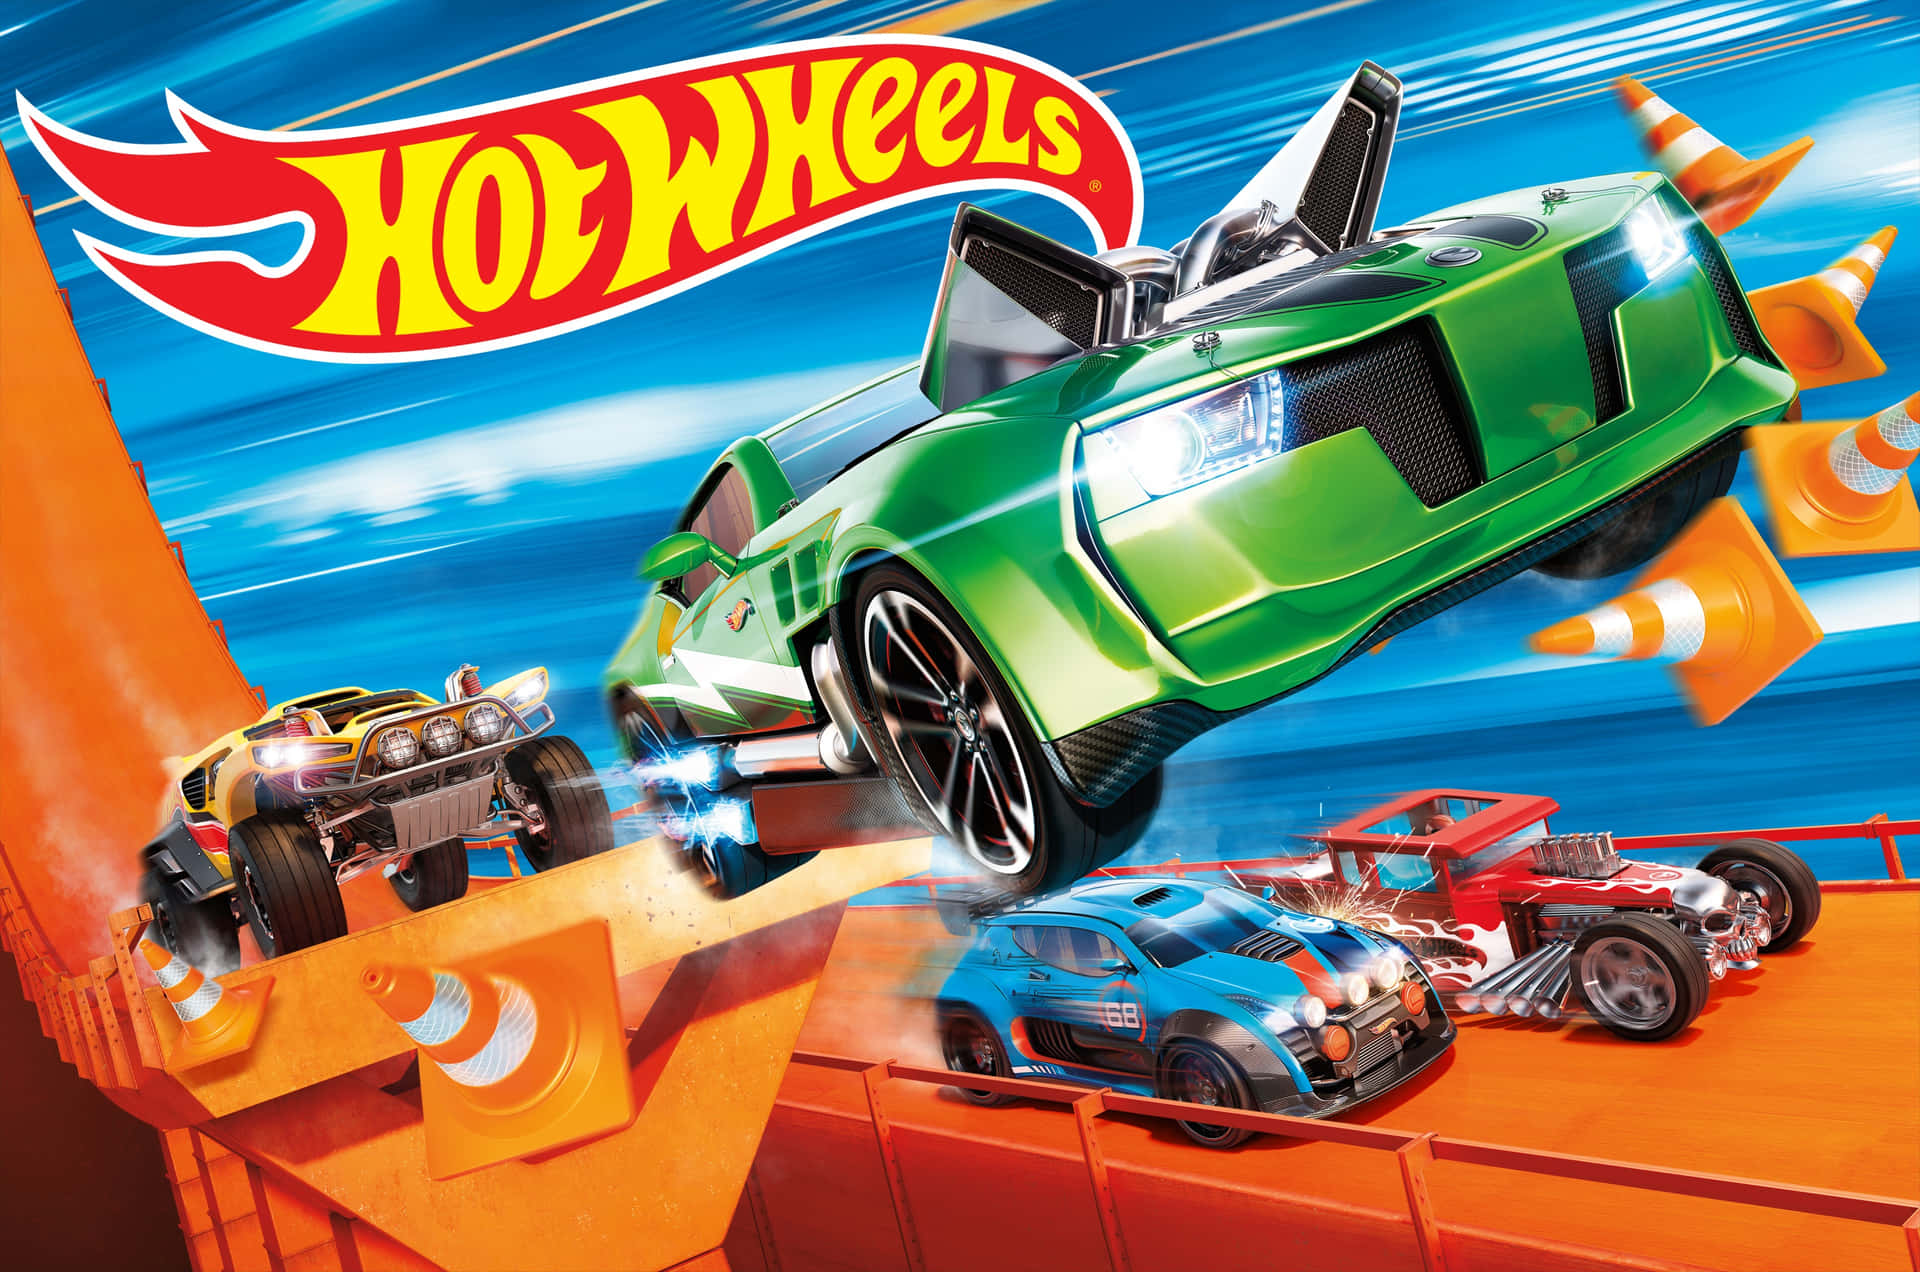 The Flame That Never Dies A Retrospective on the Hotwheels Brand Identity   by Shantanu Kumar  Bootcamp